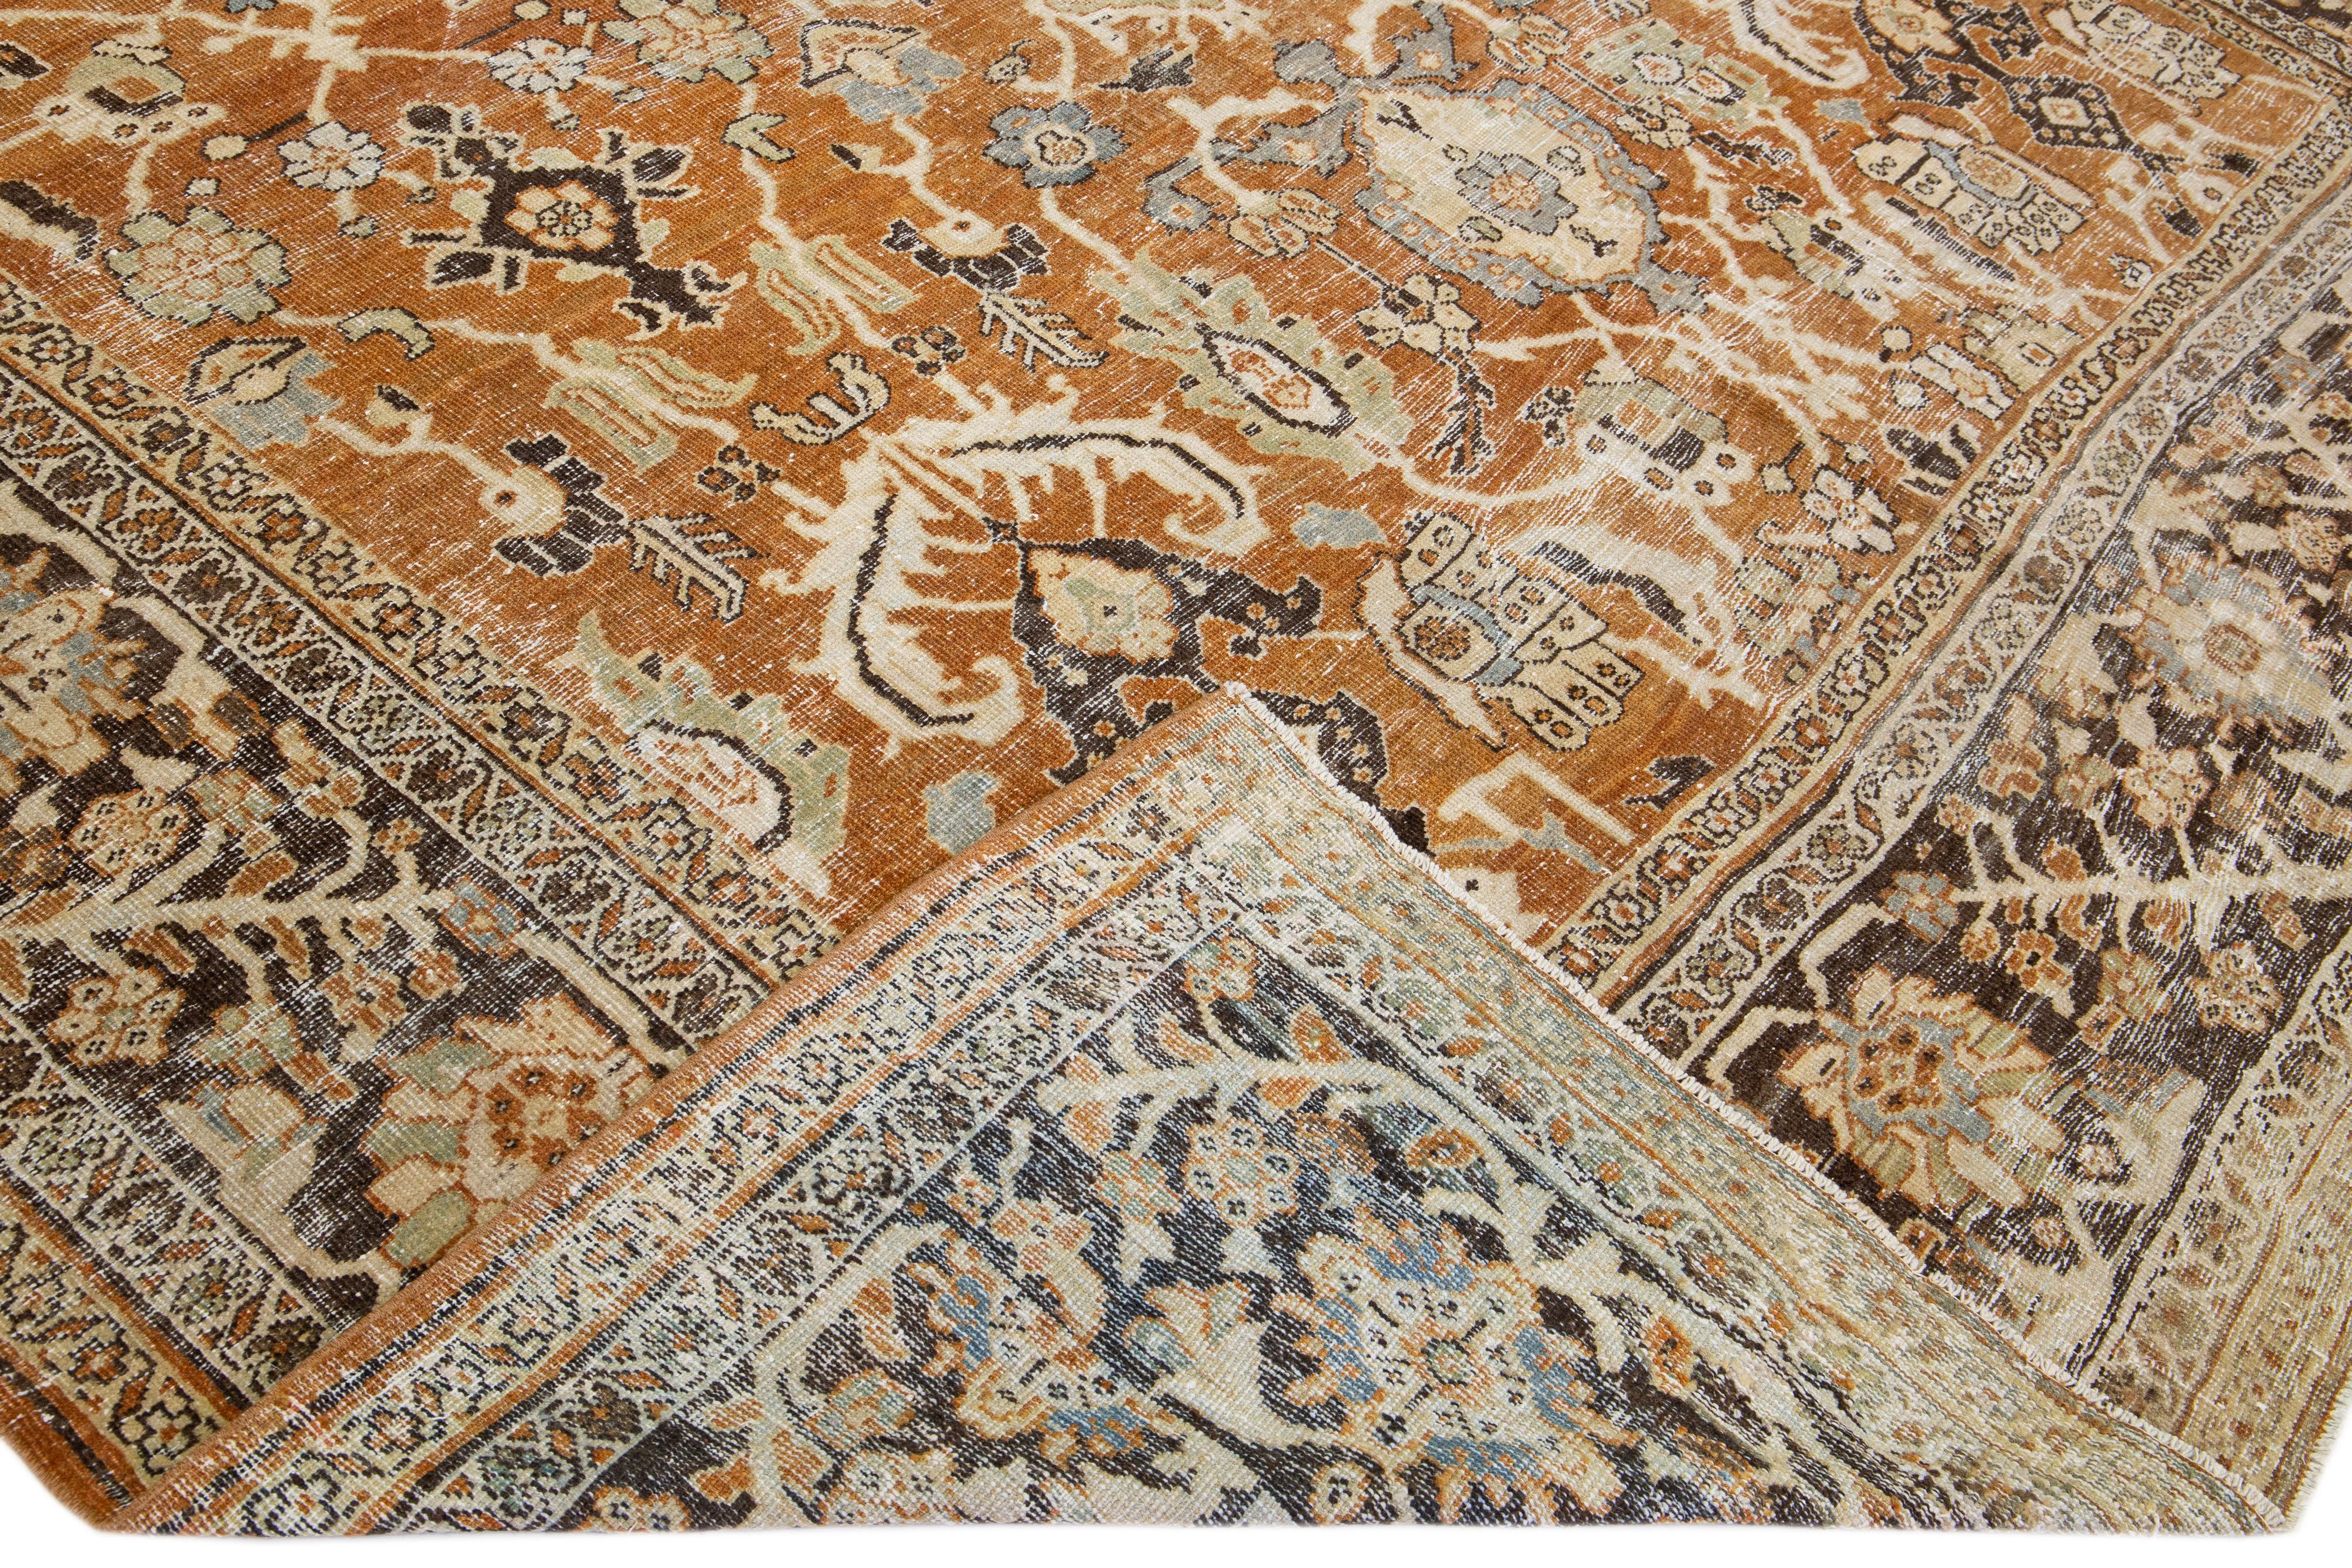 A beautiful Antique Mahal hand-knotted wool rug with a rust color field. This rug has a brown frame and multicolor accents in an all-over geometric floral design.

This rug measures 10'6